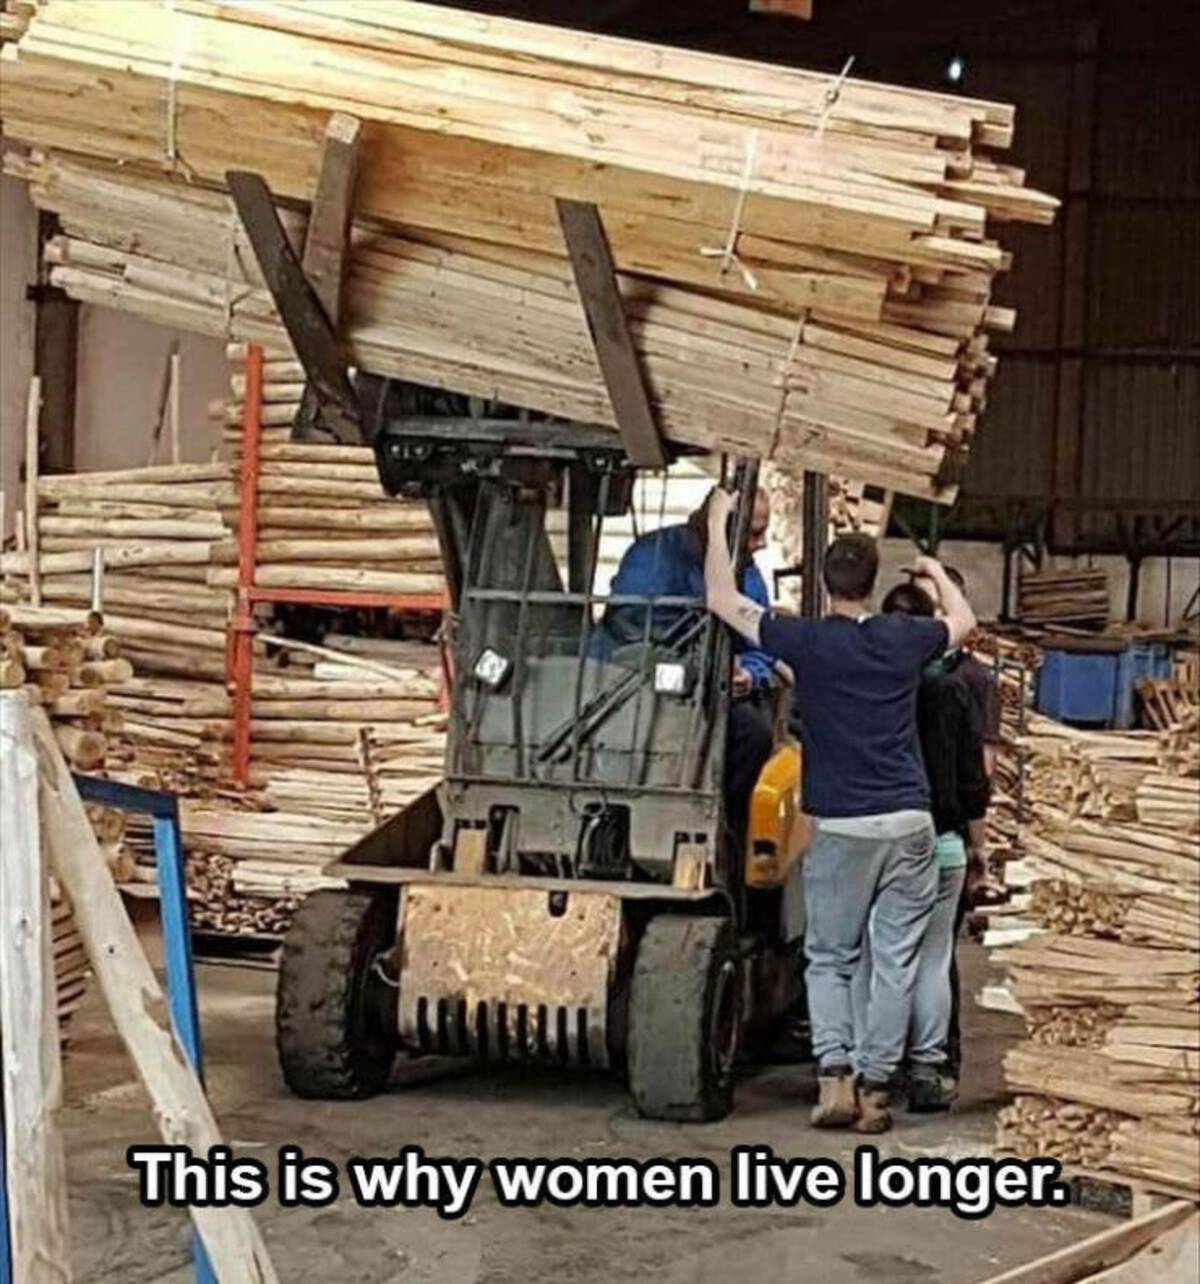 lumber - This is why women live longer.